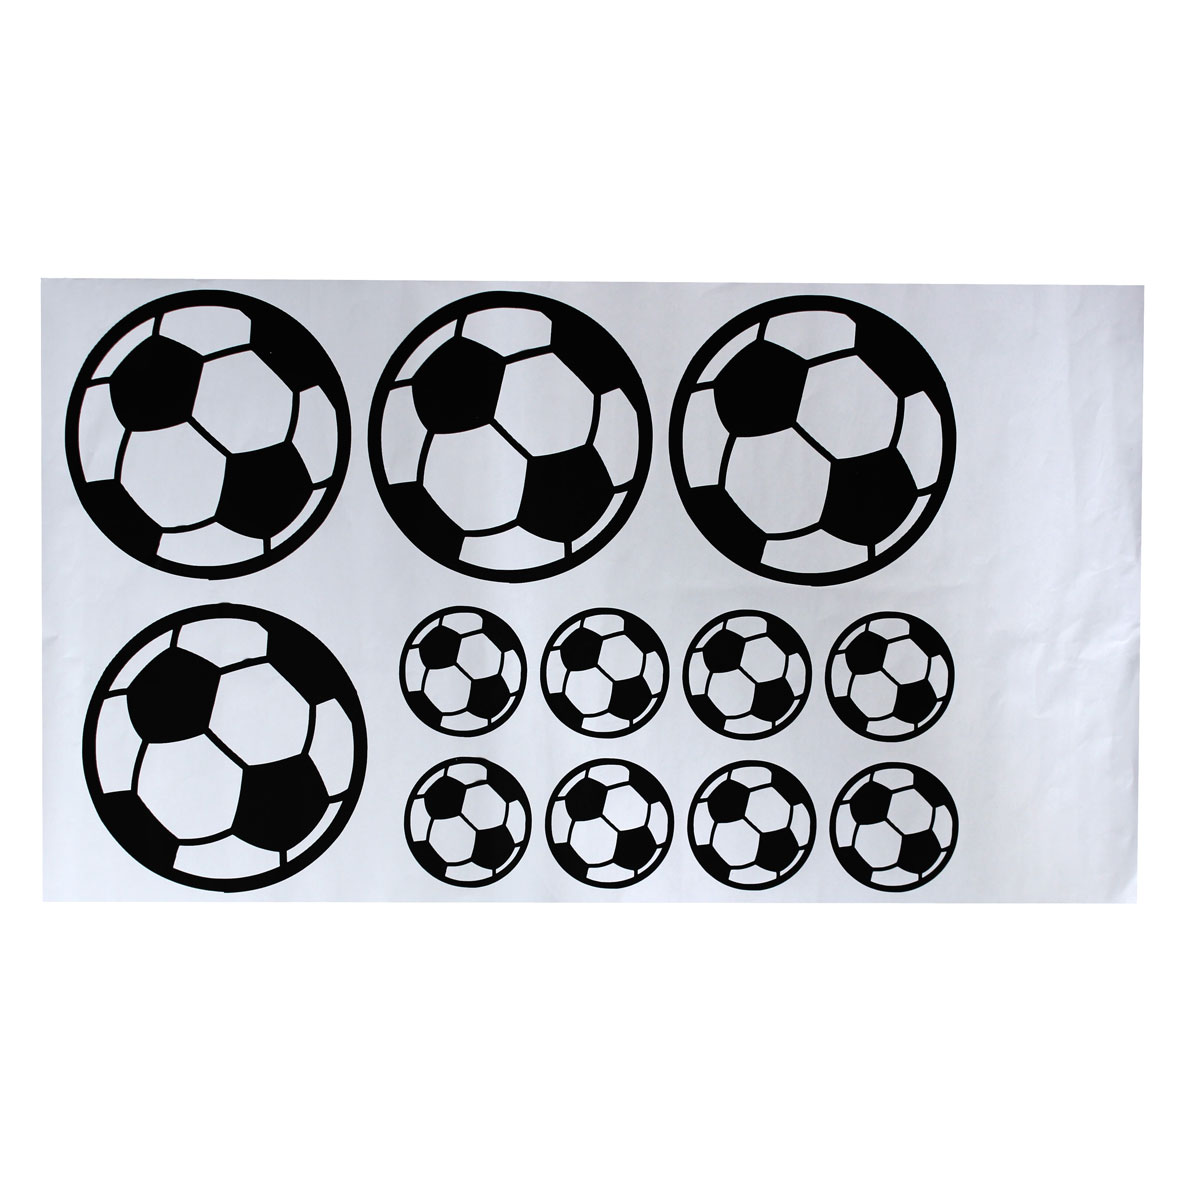 12PcsSet-Football-Soccer-Wall-Stickers-Children-Nursery-Kids-Room-Decals-Gift-Home-Decorations-1470248-4